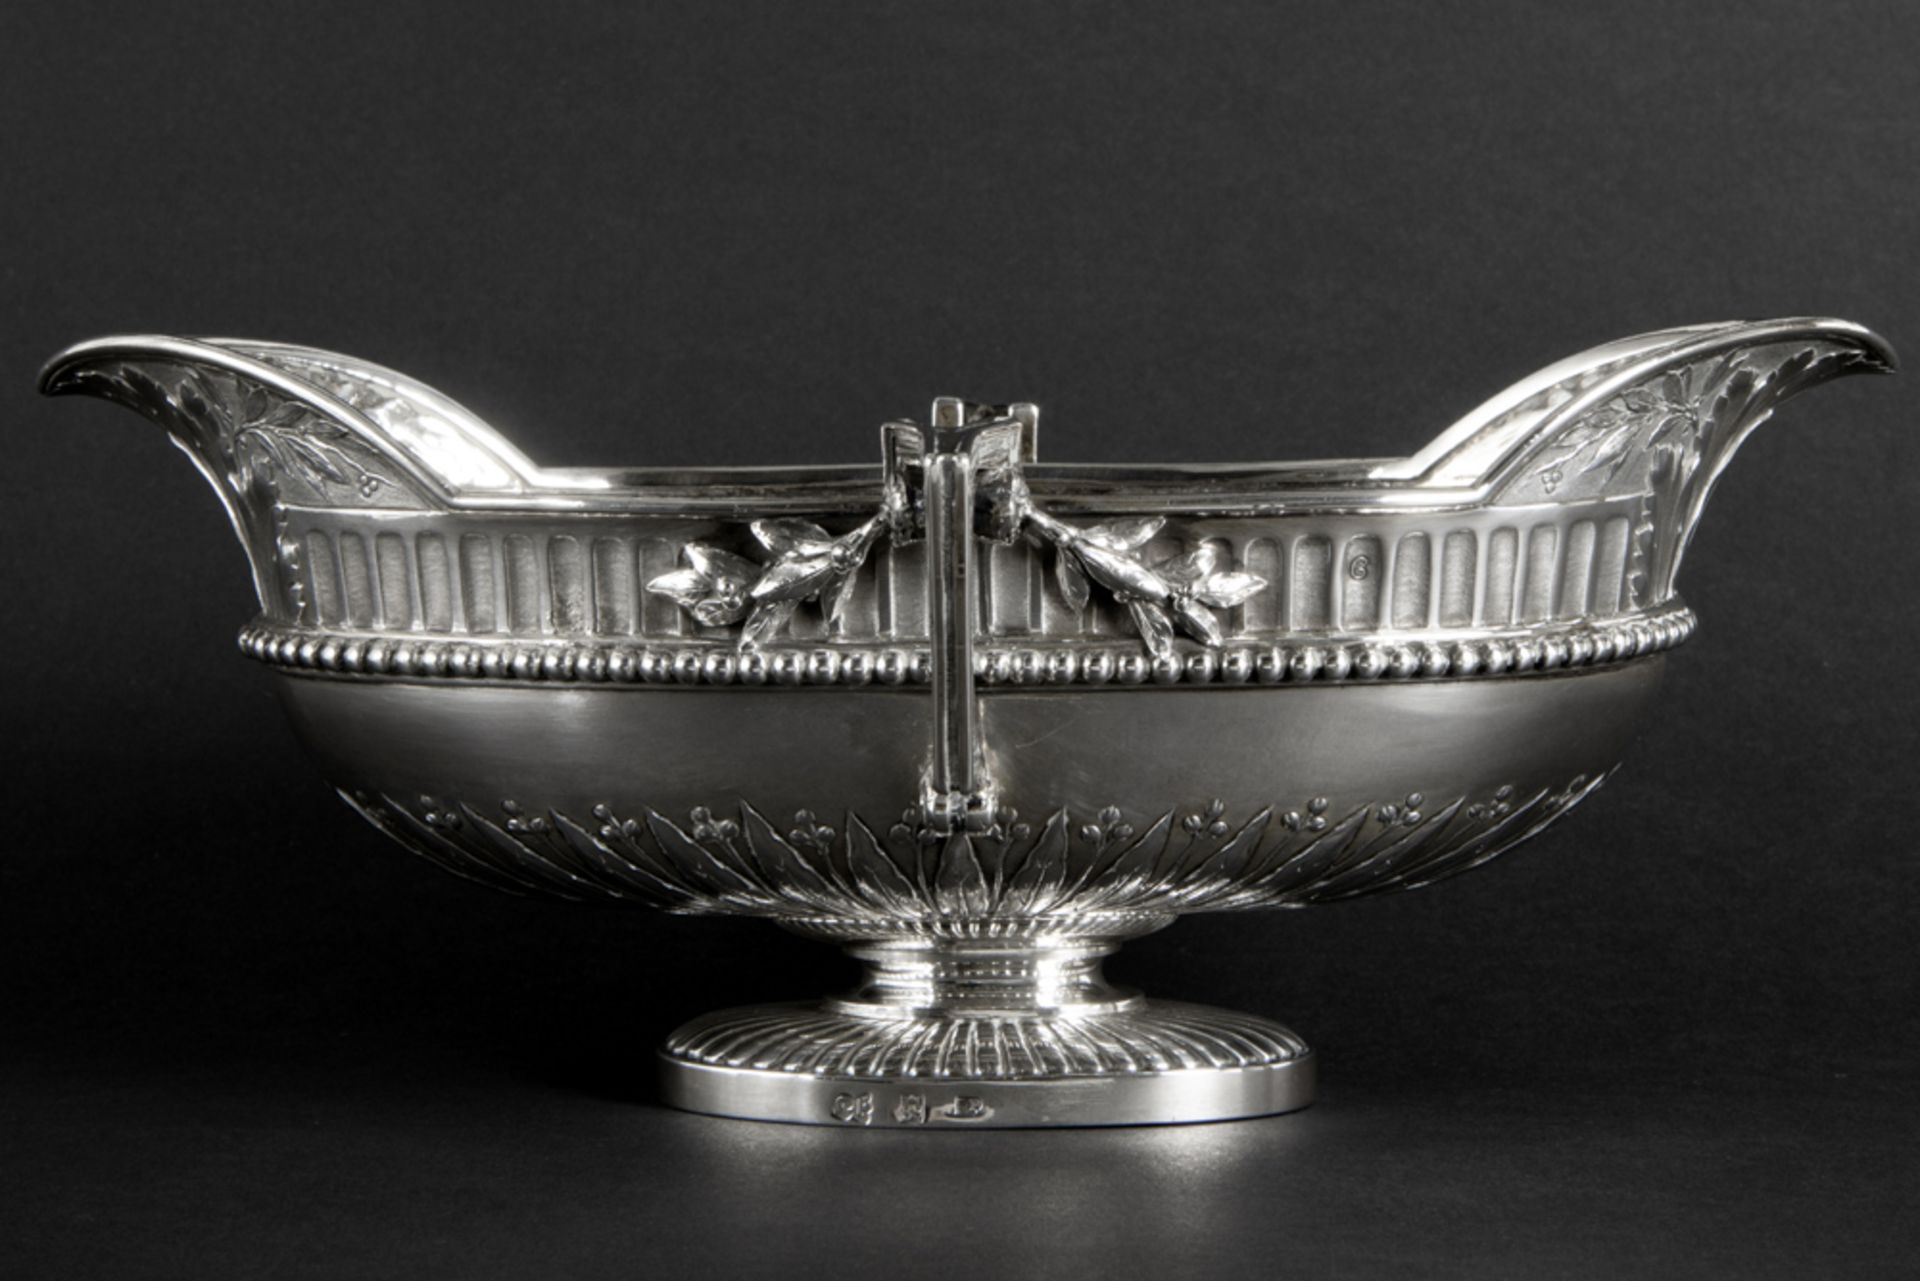 18th Cent. French neoclassical sauce boat in marked silver (with crowned G and 89) || Achttiende